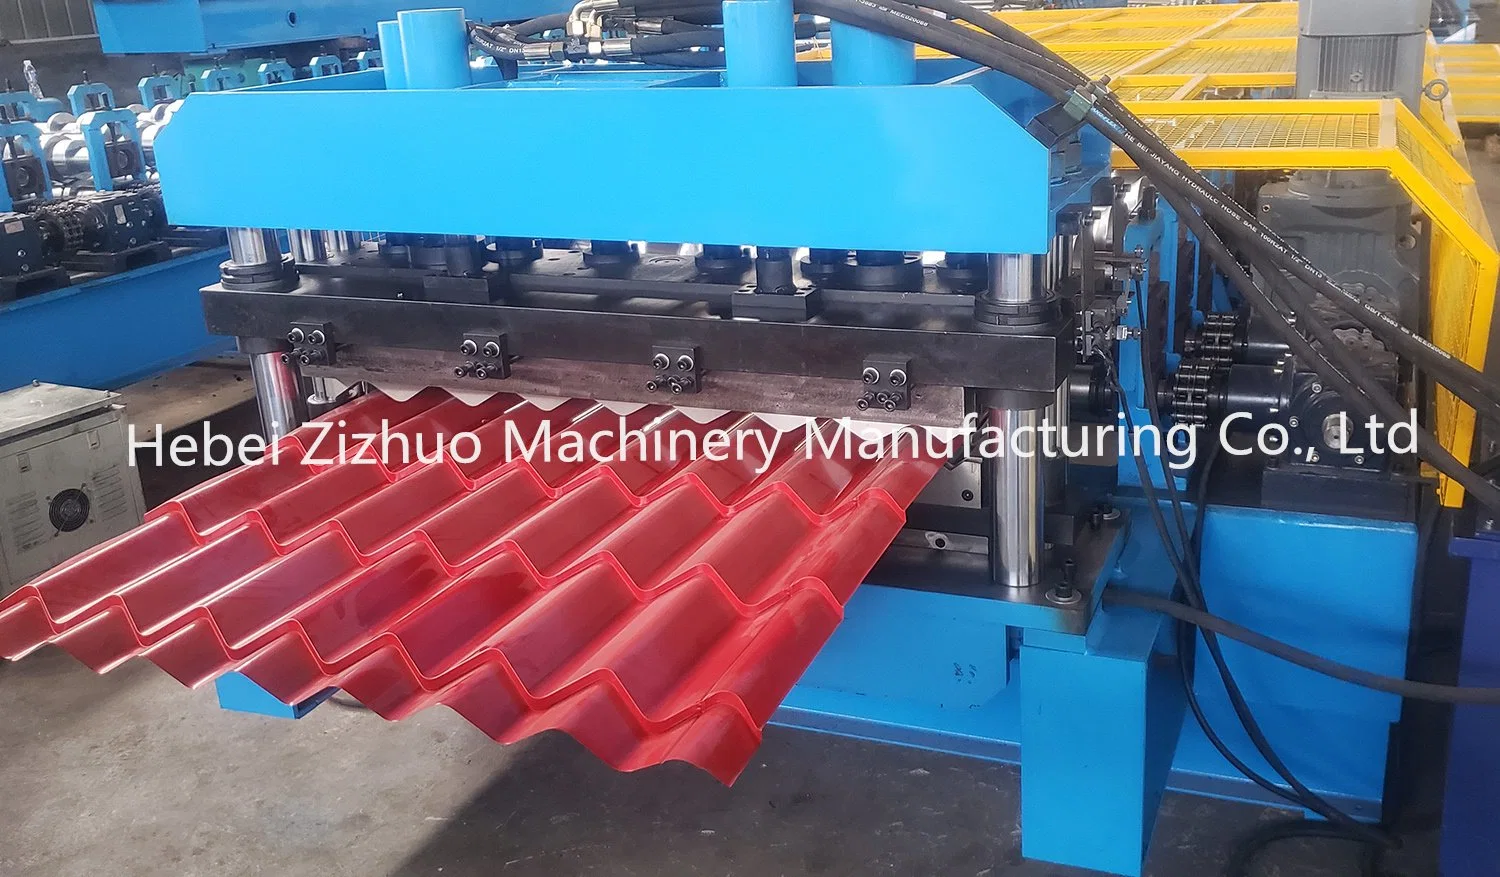 Europe 828 Steel Roofing Tile Sheet Cold Roll Forming Machine